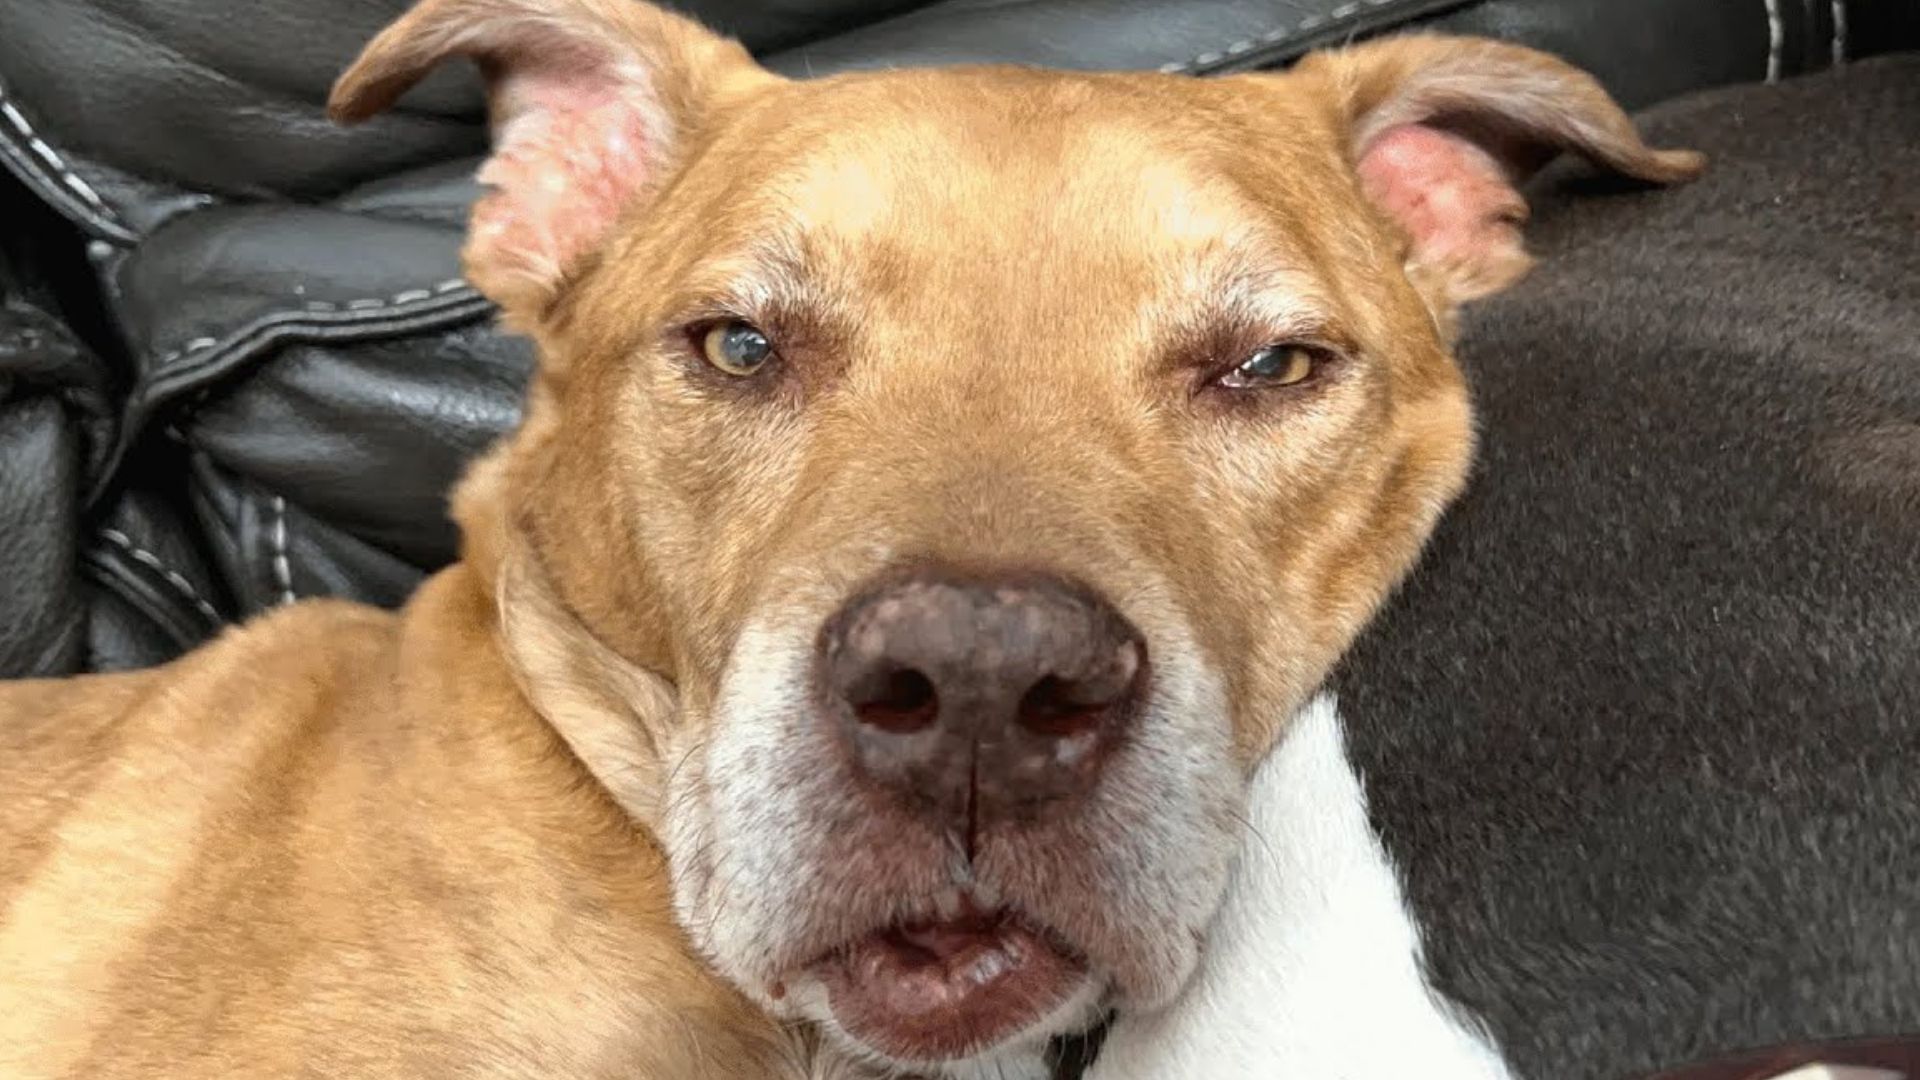 Woman Adopted A Sweet ‘Senior’ Dog Only To Learn The Real Truth About Him